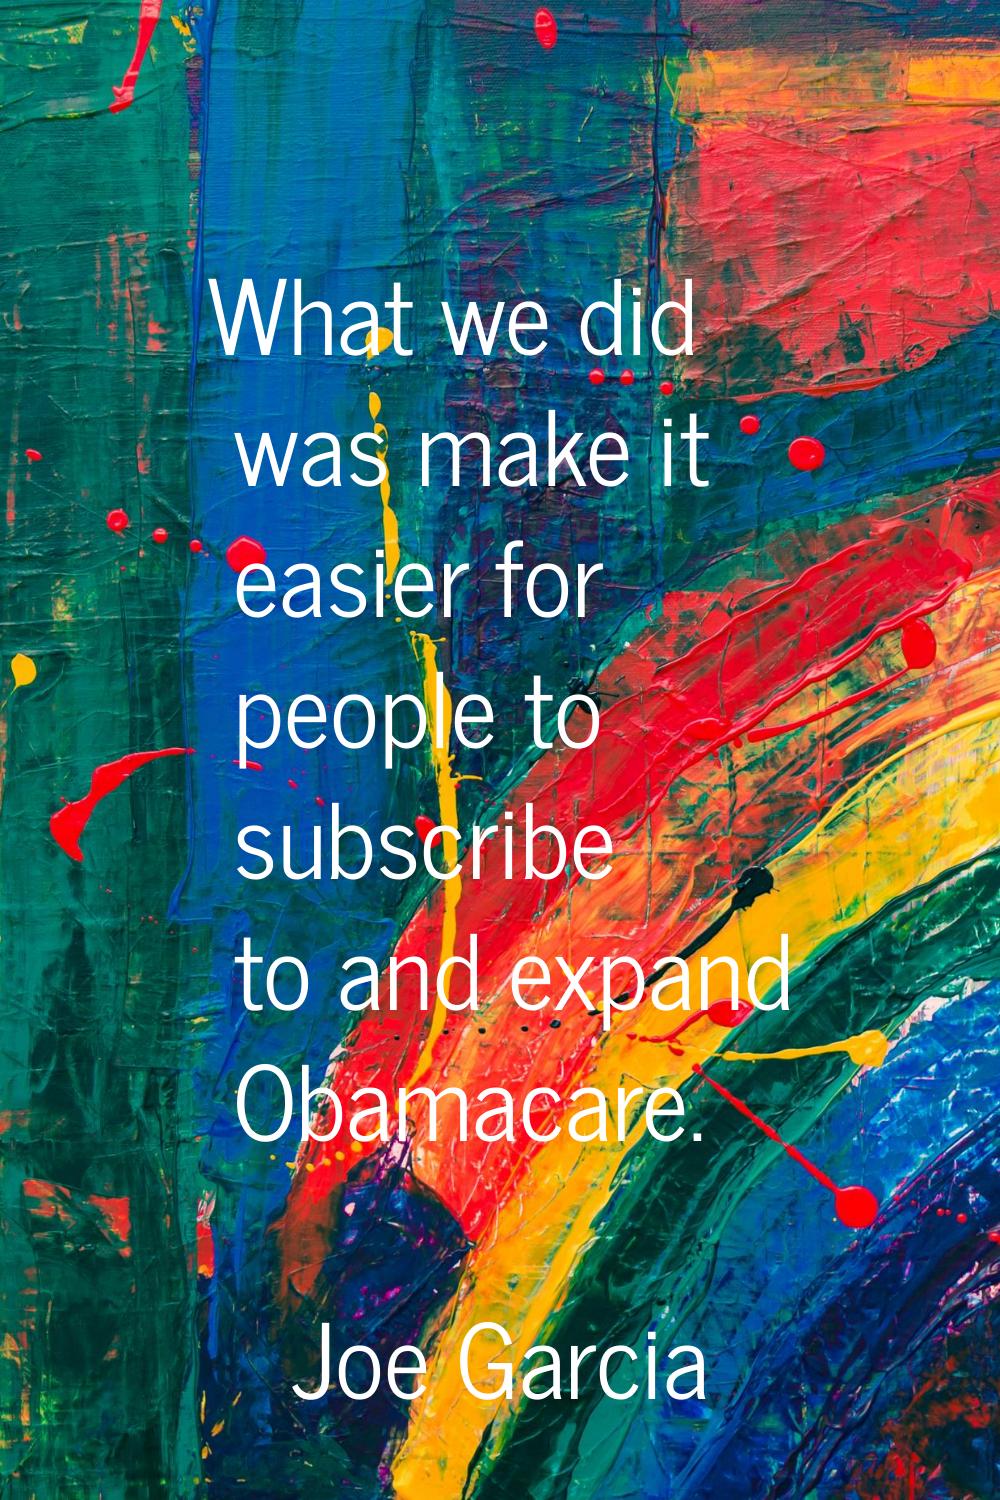 What we did was make it easier for people to subscribe to and expand Obamacare.